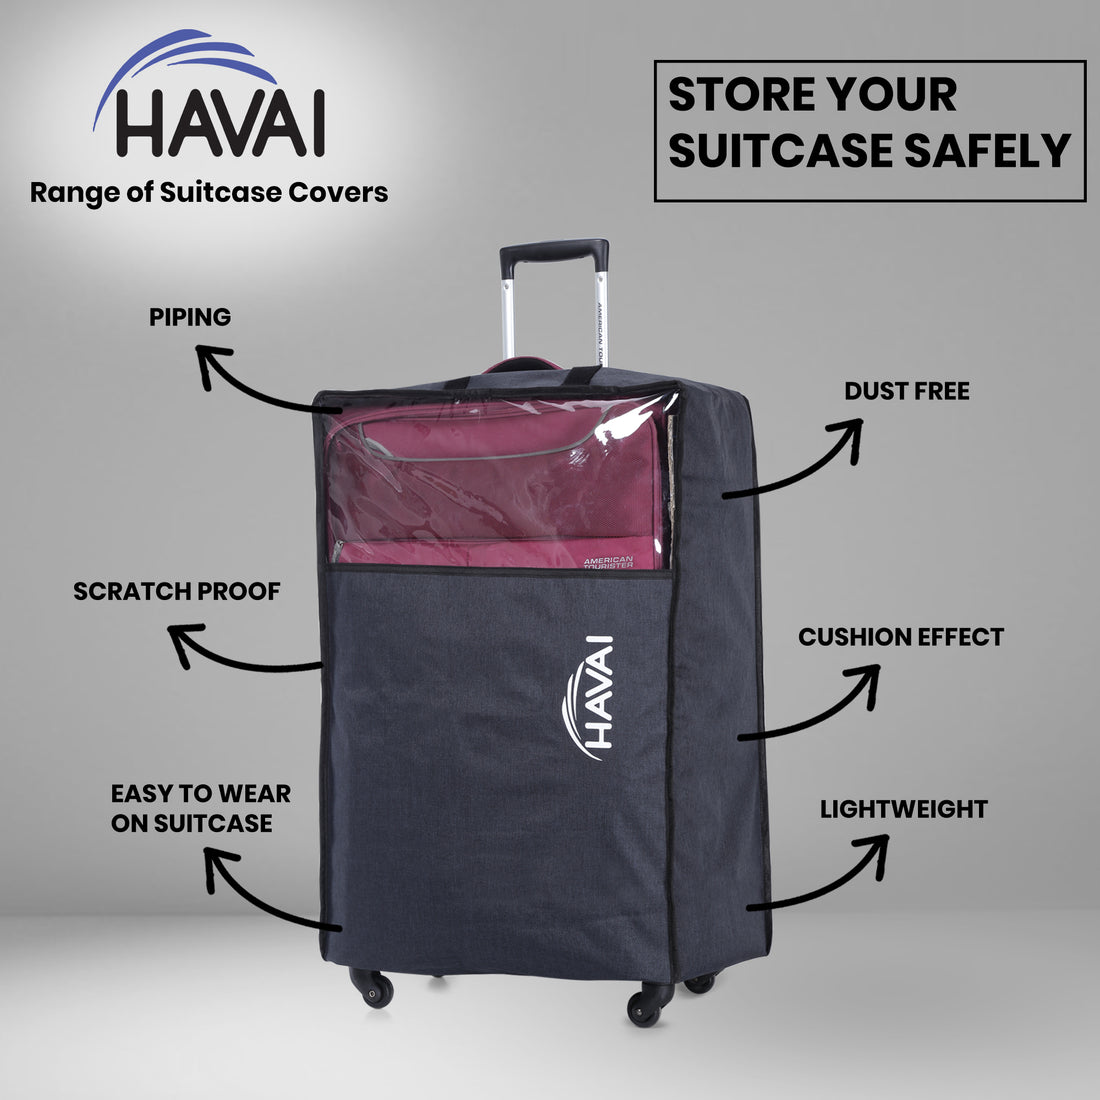 HAVAI Suitcase Storage Protector - Store your suitcase Safely (26 Inch), Navy Blue, Pack of 1